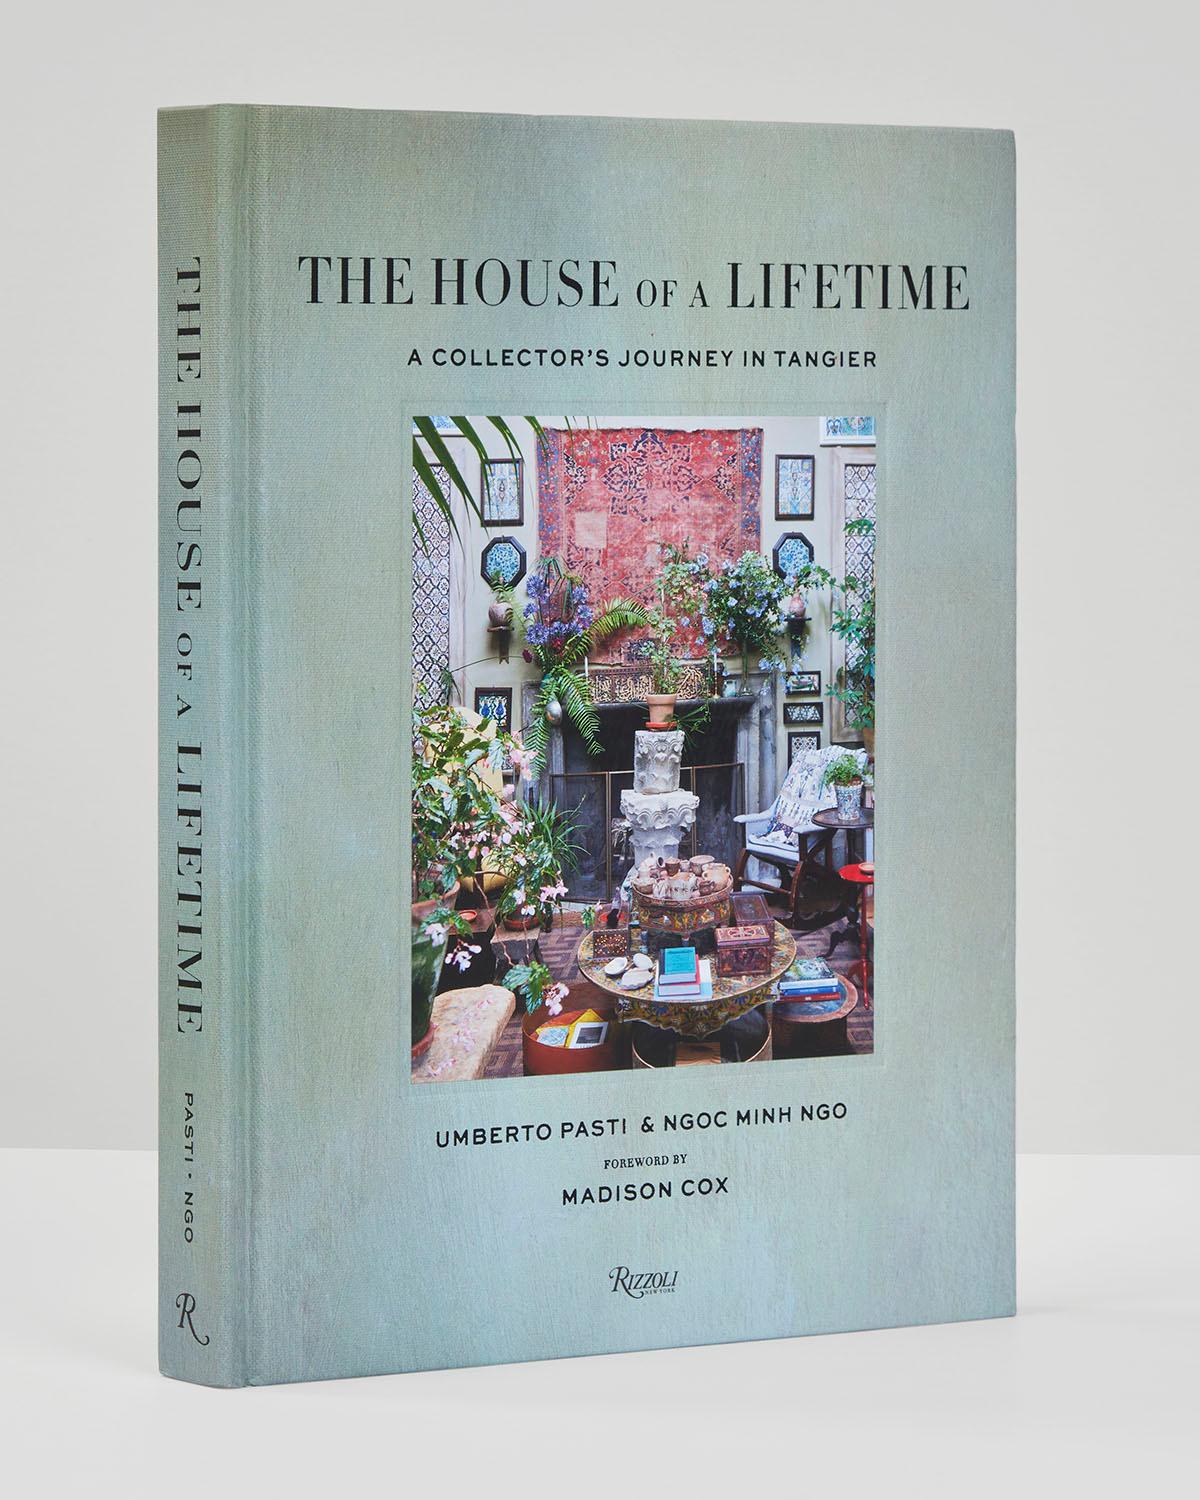 The House of a Lifetime: A Collector’s Journey in Tangier
Author Umberto Pasti and Ngoc Minh Ngo, Foreword by Madison Cox

A photographic tour of an exceptional villa in Tangier with a special focus of its museum-worthy collections of Morrocan